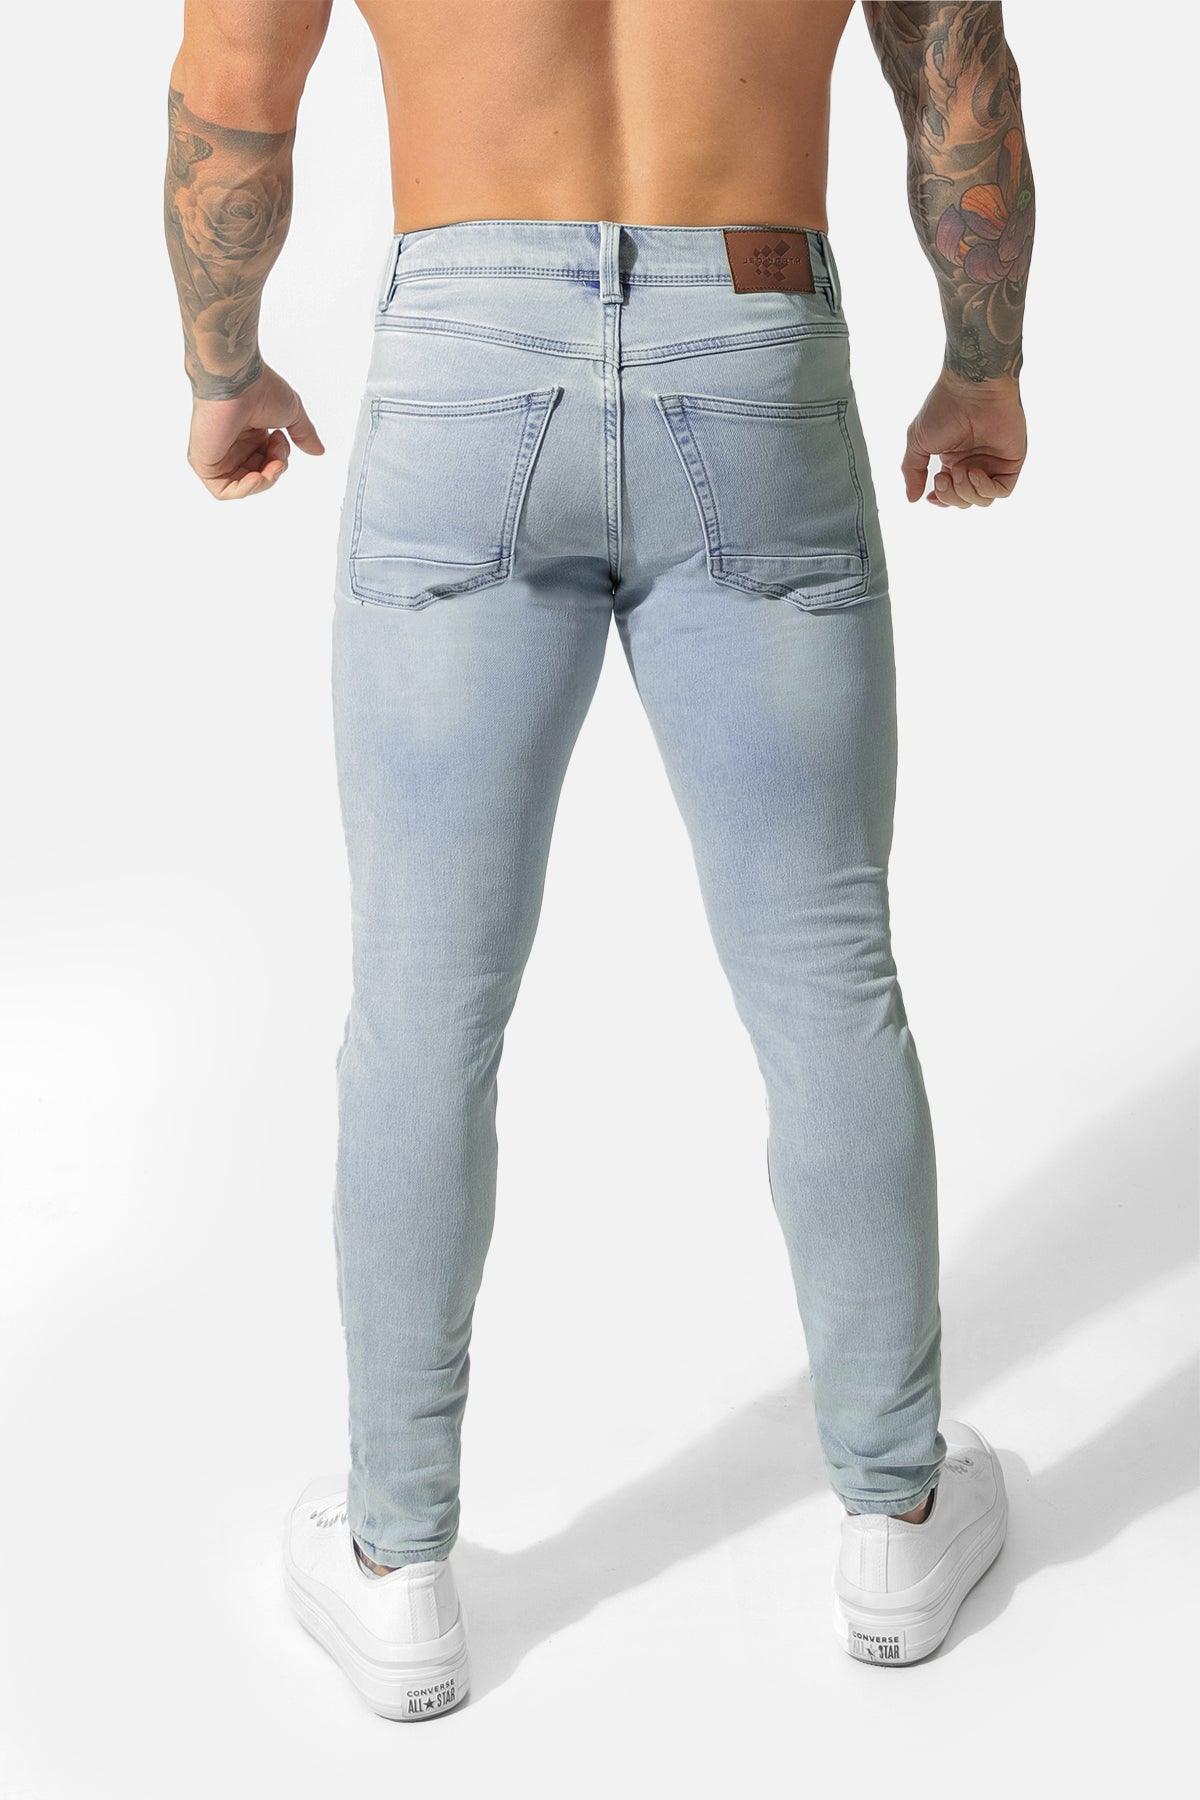 Men's Premium Fitted Stretchy Jeans - Faded Light Blue - Jed North Canada